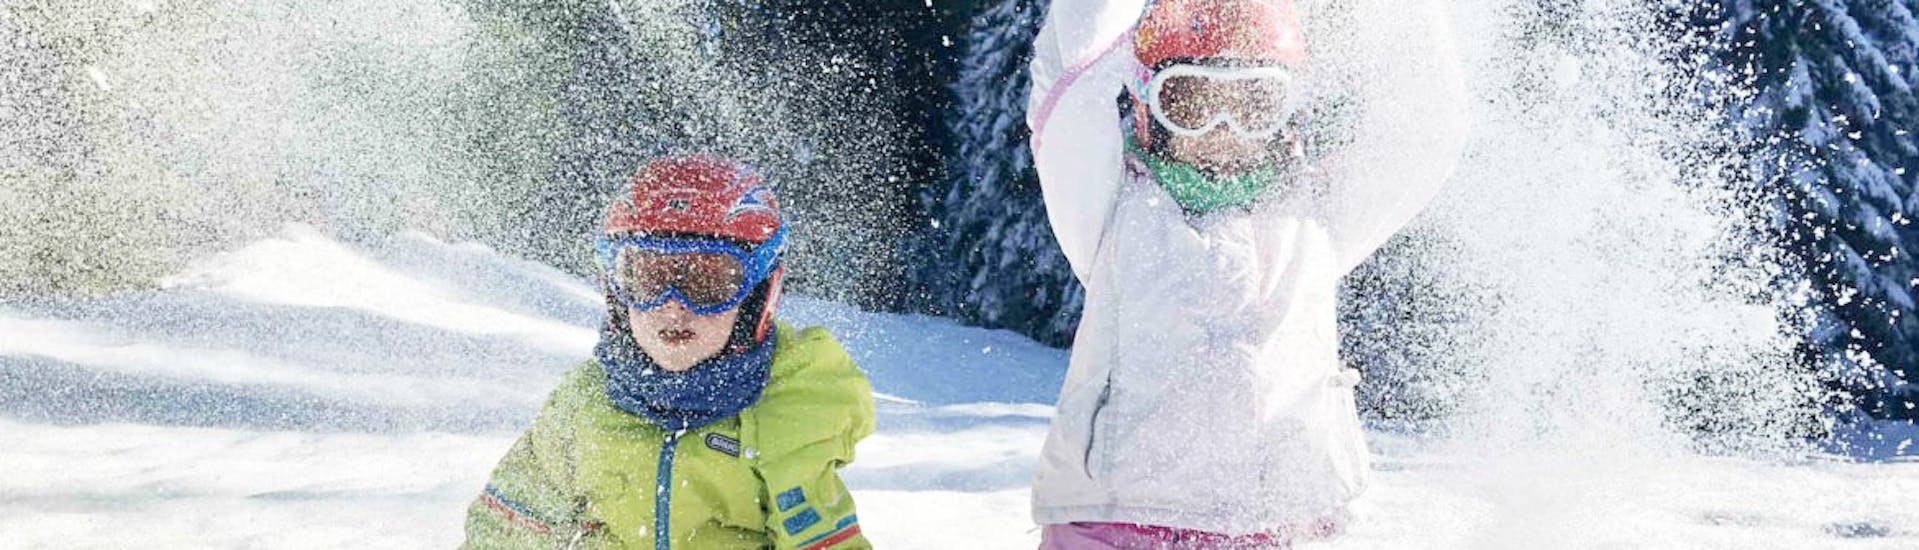 Two kids playing during the Kids Ski Lessons (5-12 y.)  for Experienced Skiers with Scuola Sci Scie di Passione Folgaria.